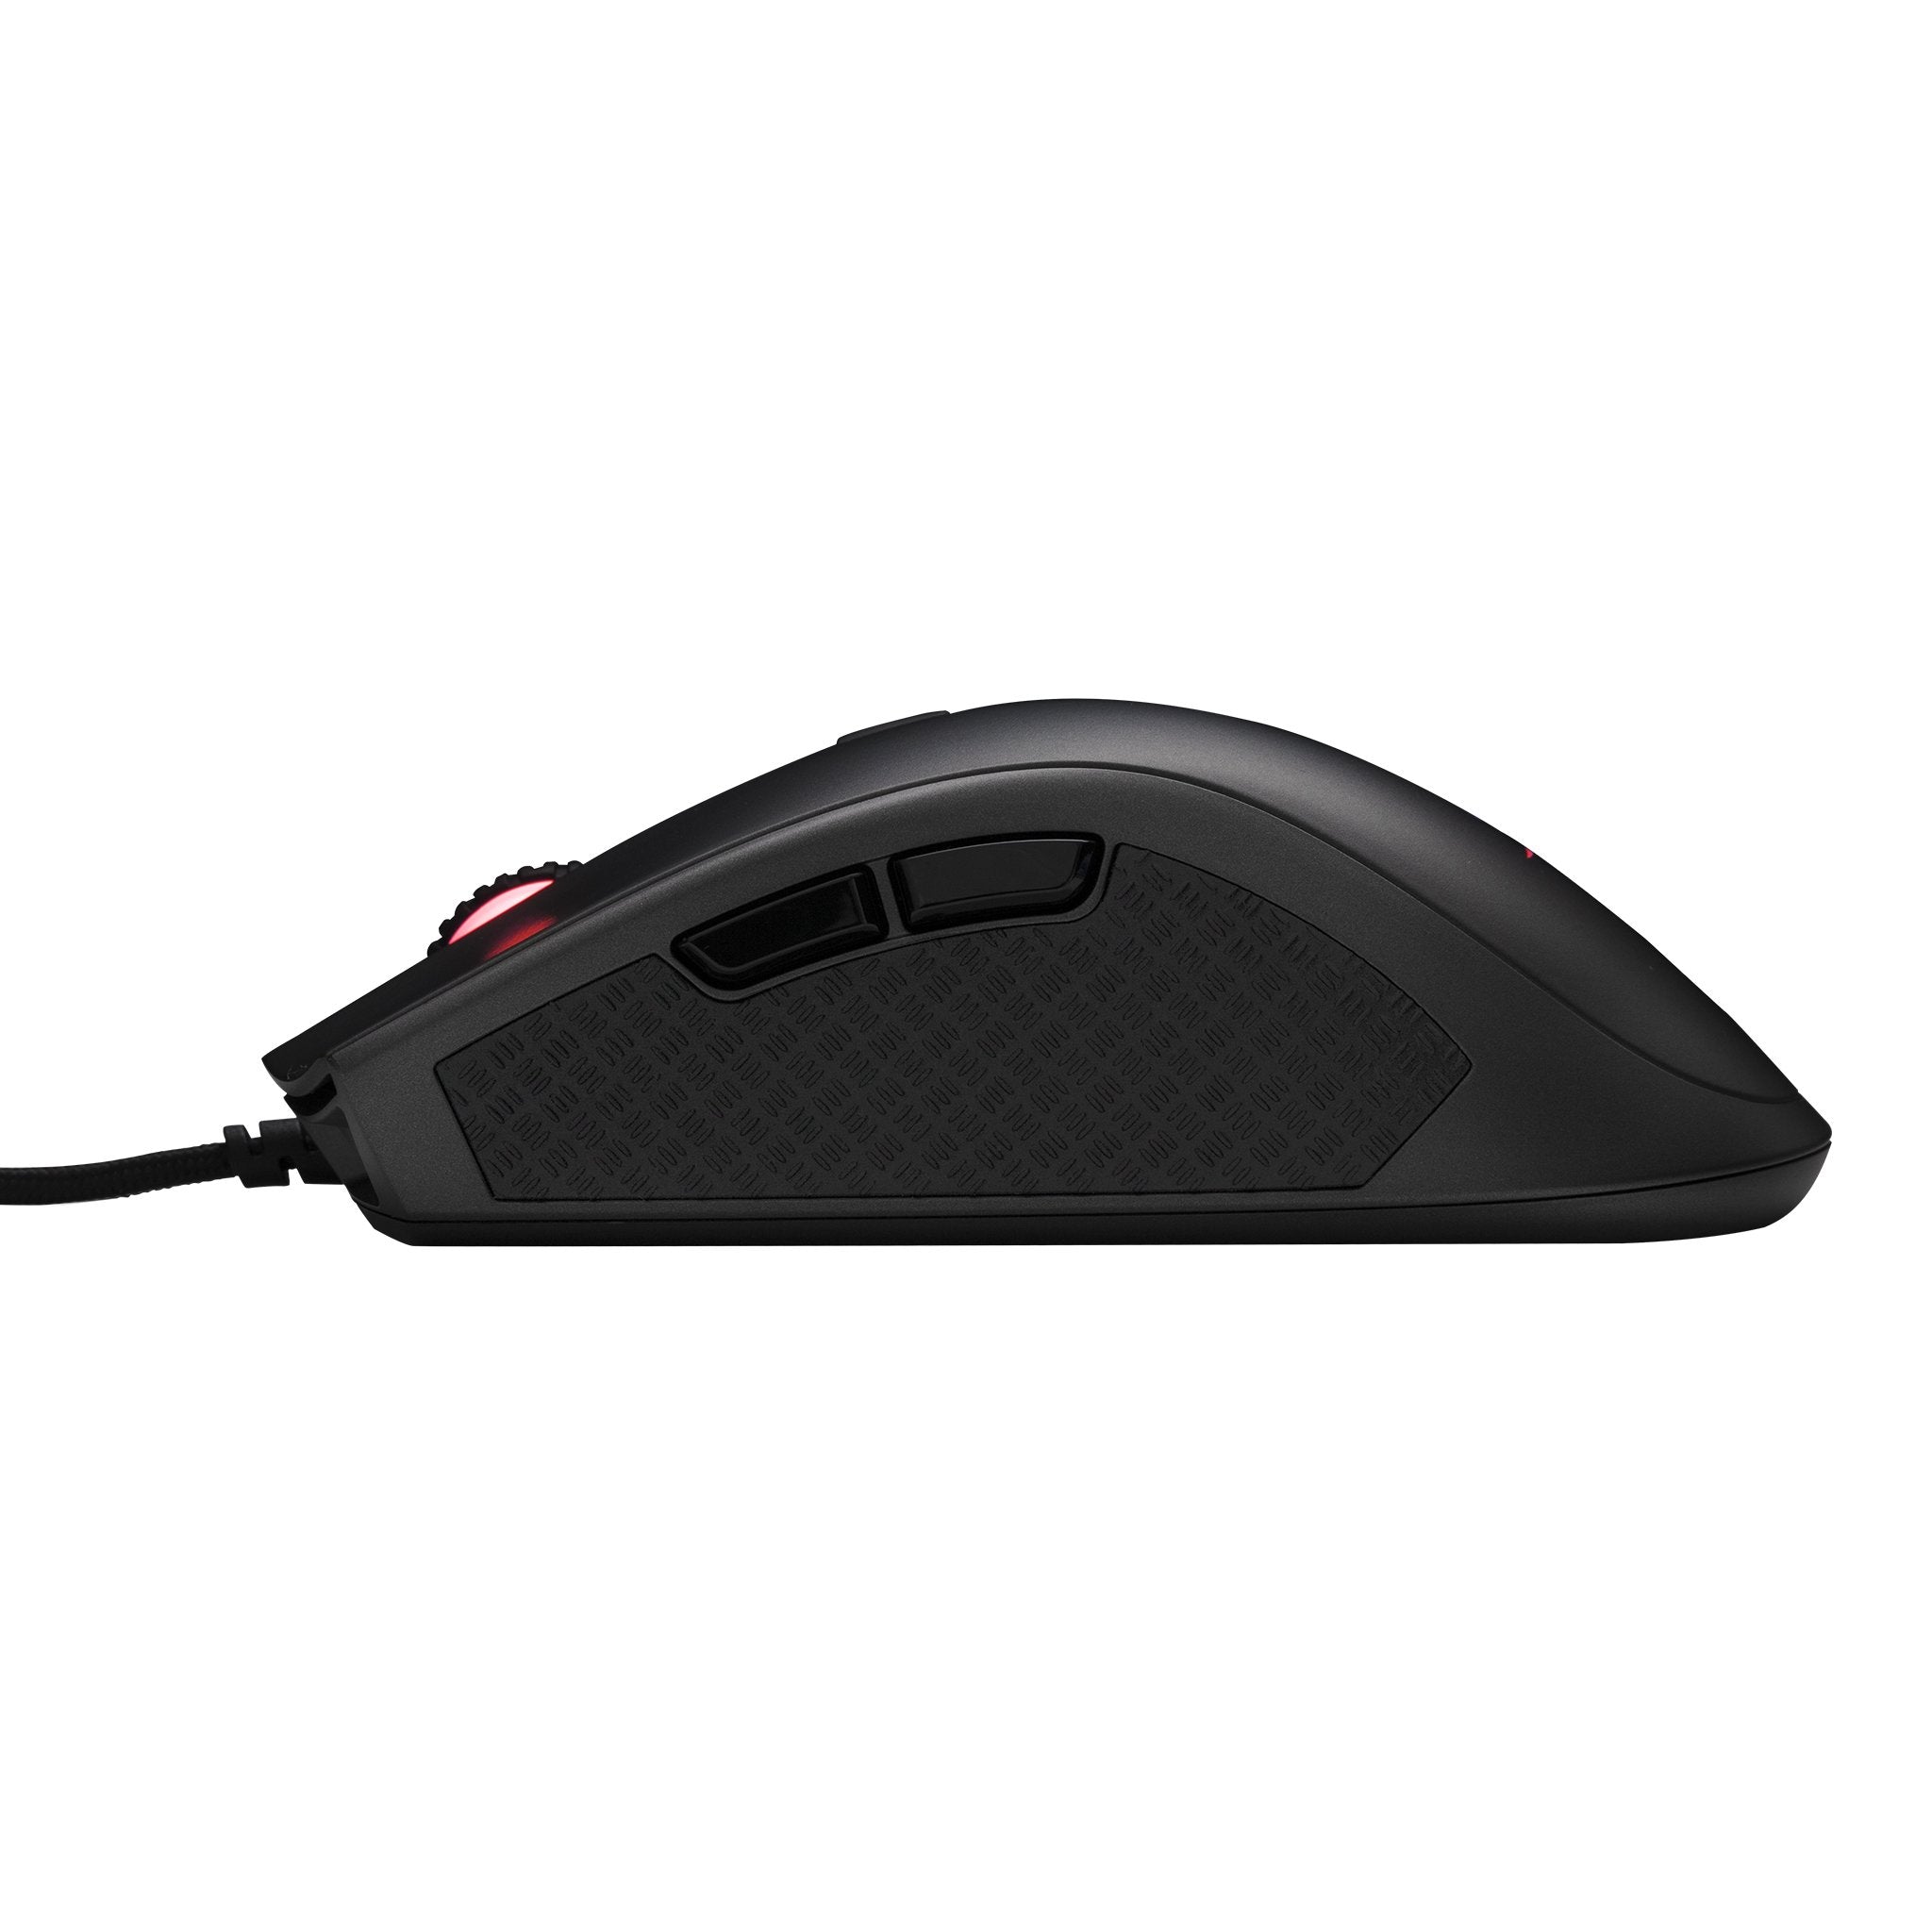 Mouse Gamer HyperX Pulsefire FPS Pro RGB, cable USB